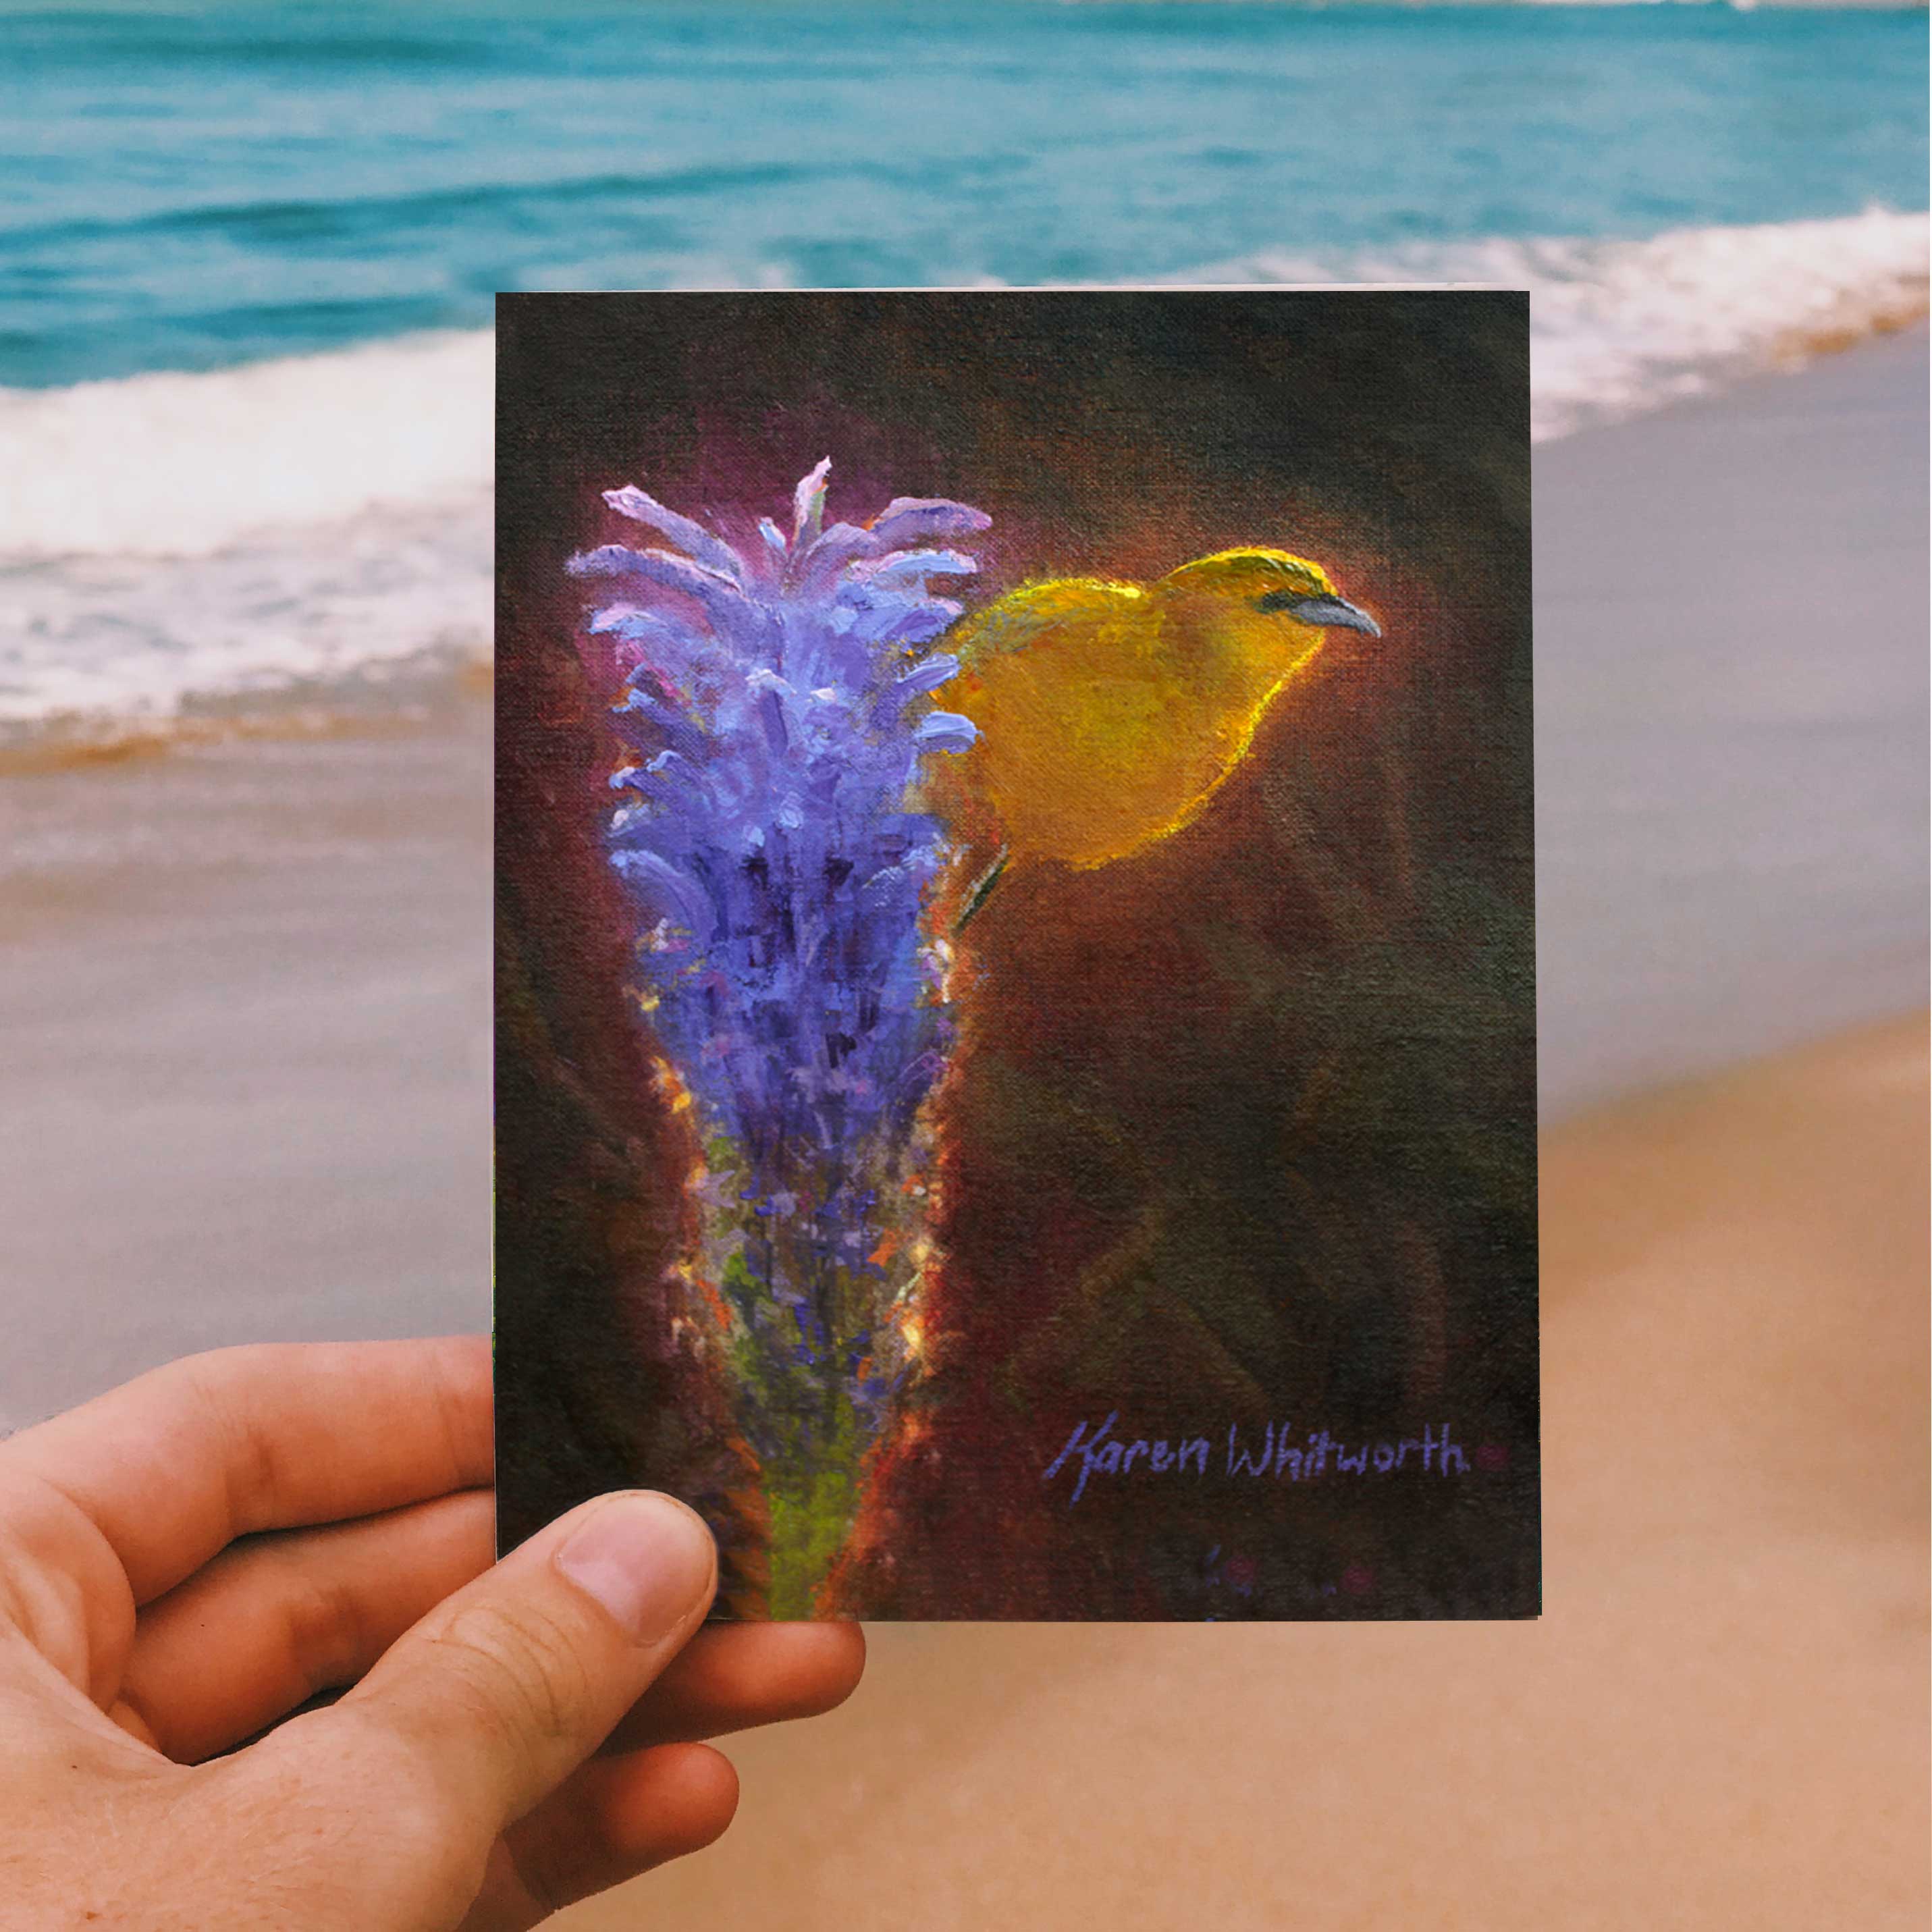 Person holding a Hawaii note card featuring painting of Amakihi Bird and Haleakala Lobelia Flower against a beach background